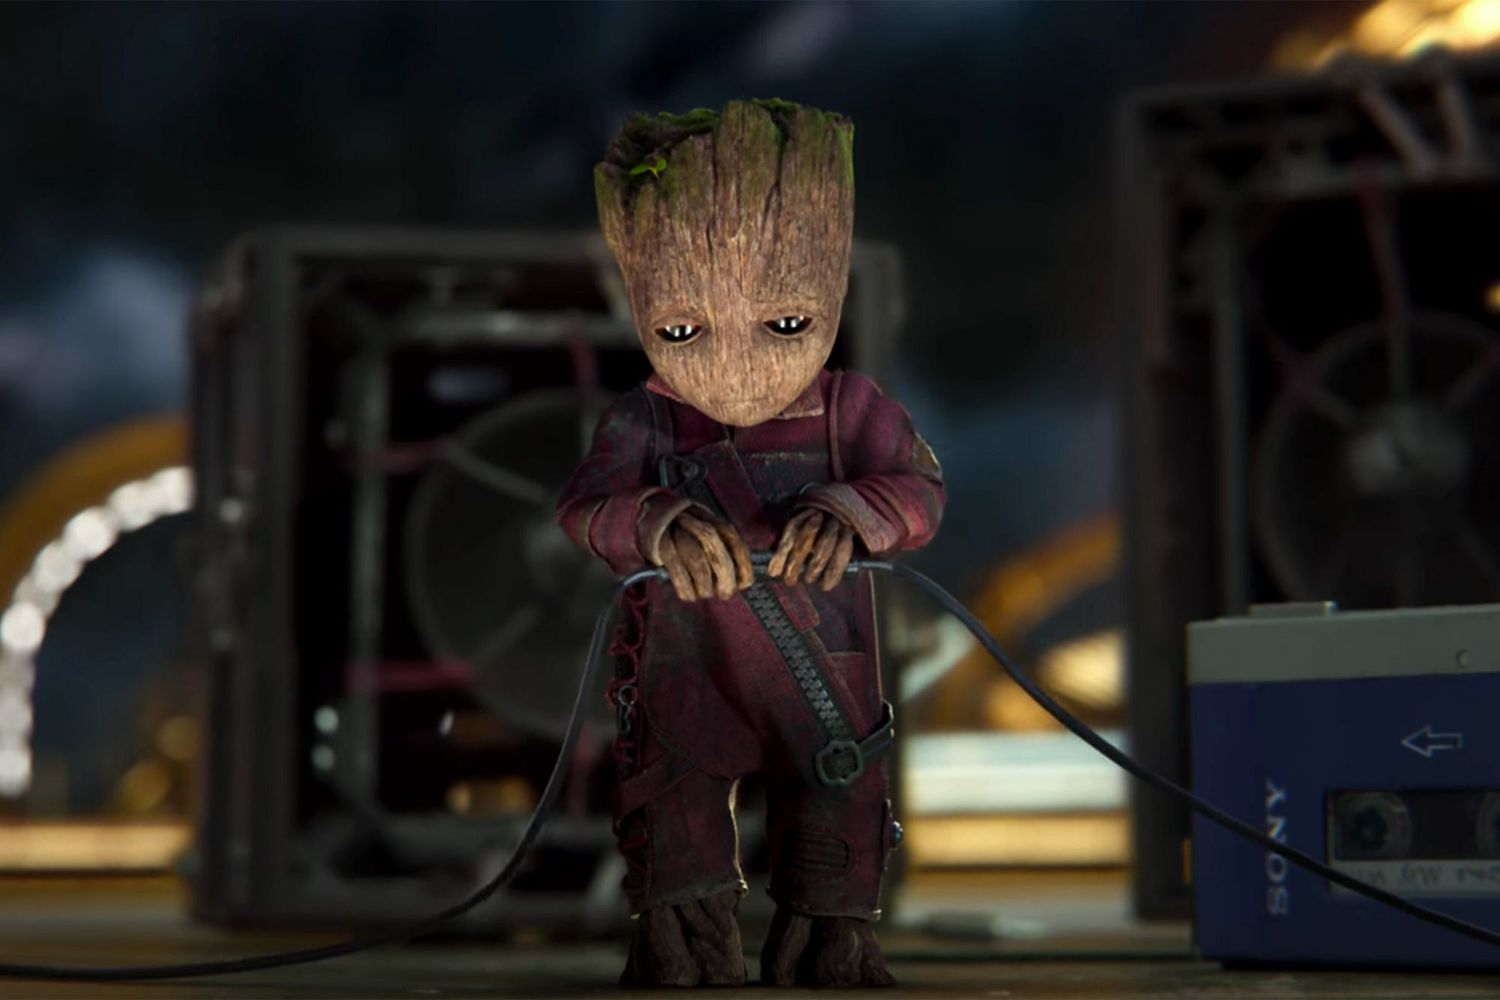 Guardians of the Galaxy Vol. 2 Trailer